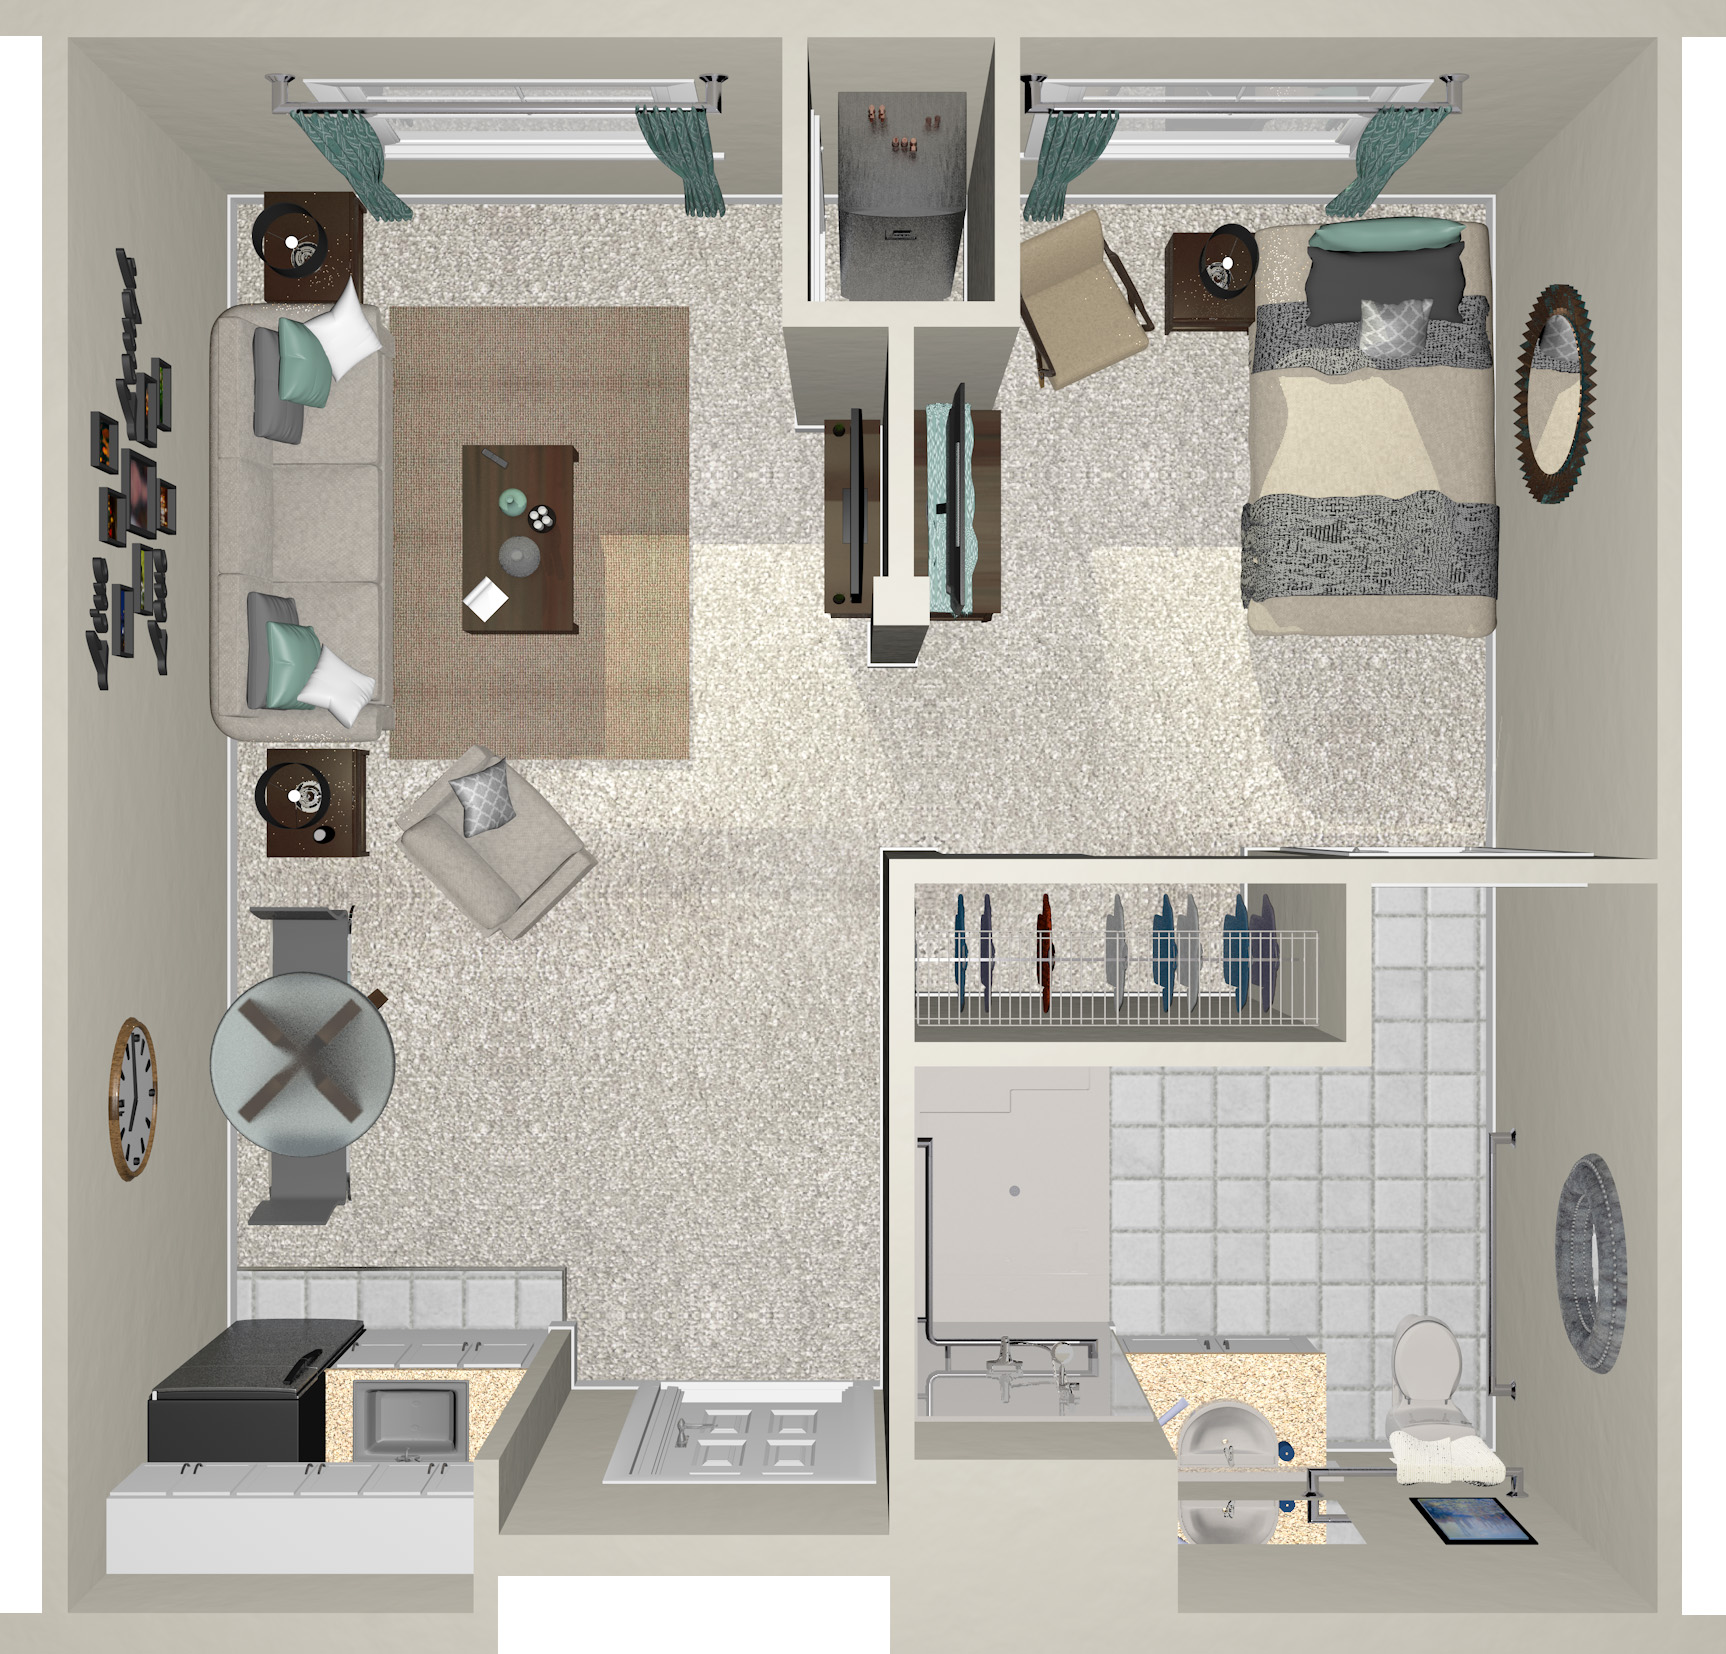 Camellia One Bedroom - 458 Sq. Ft.